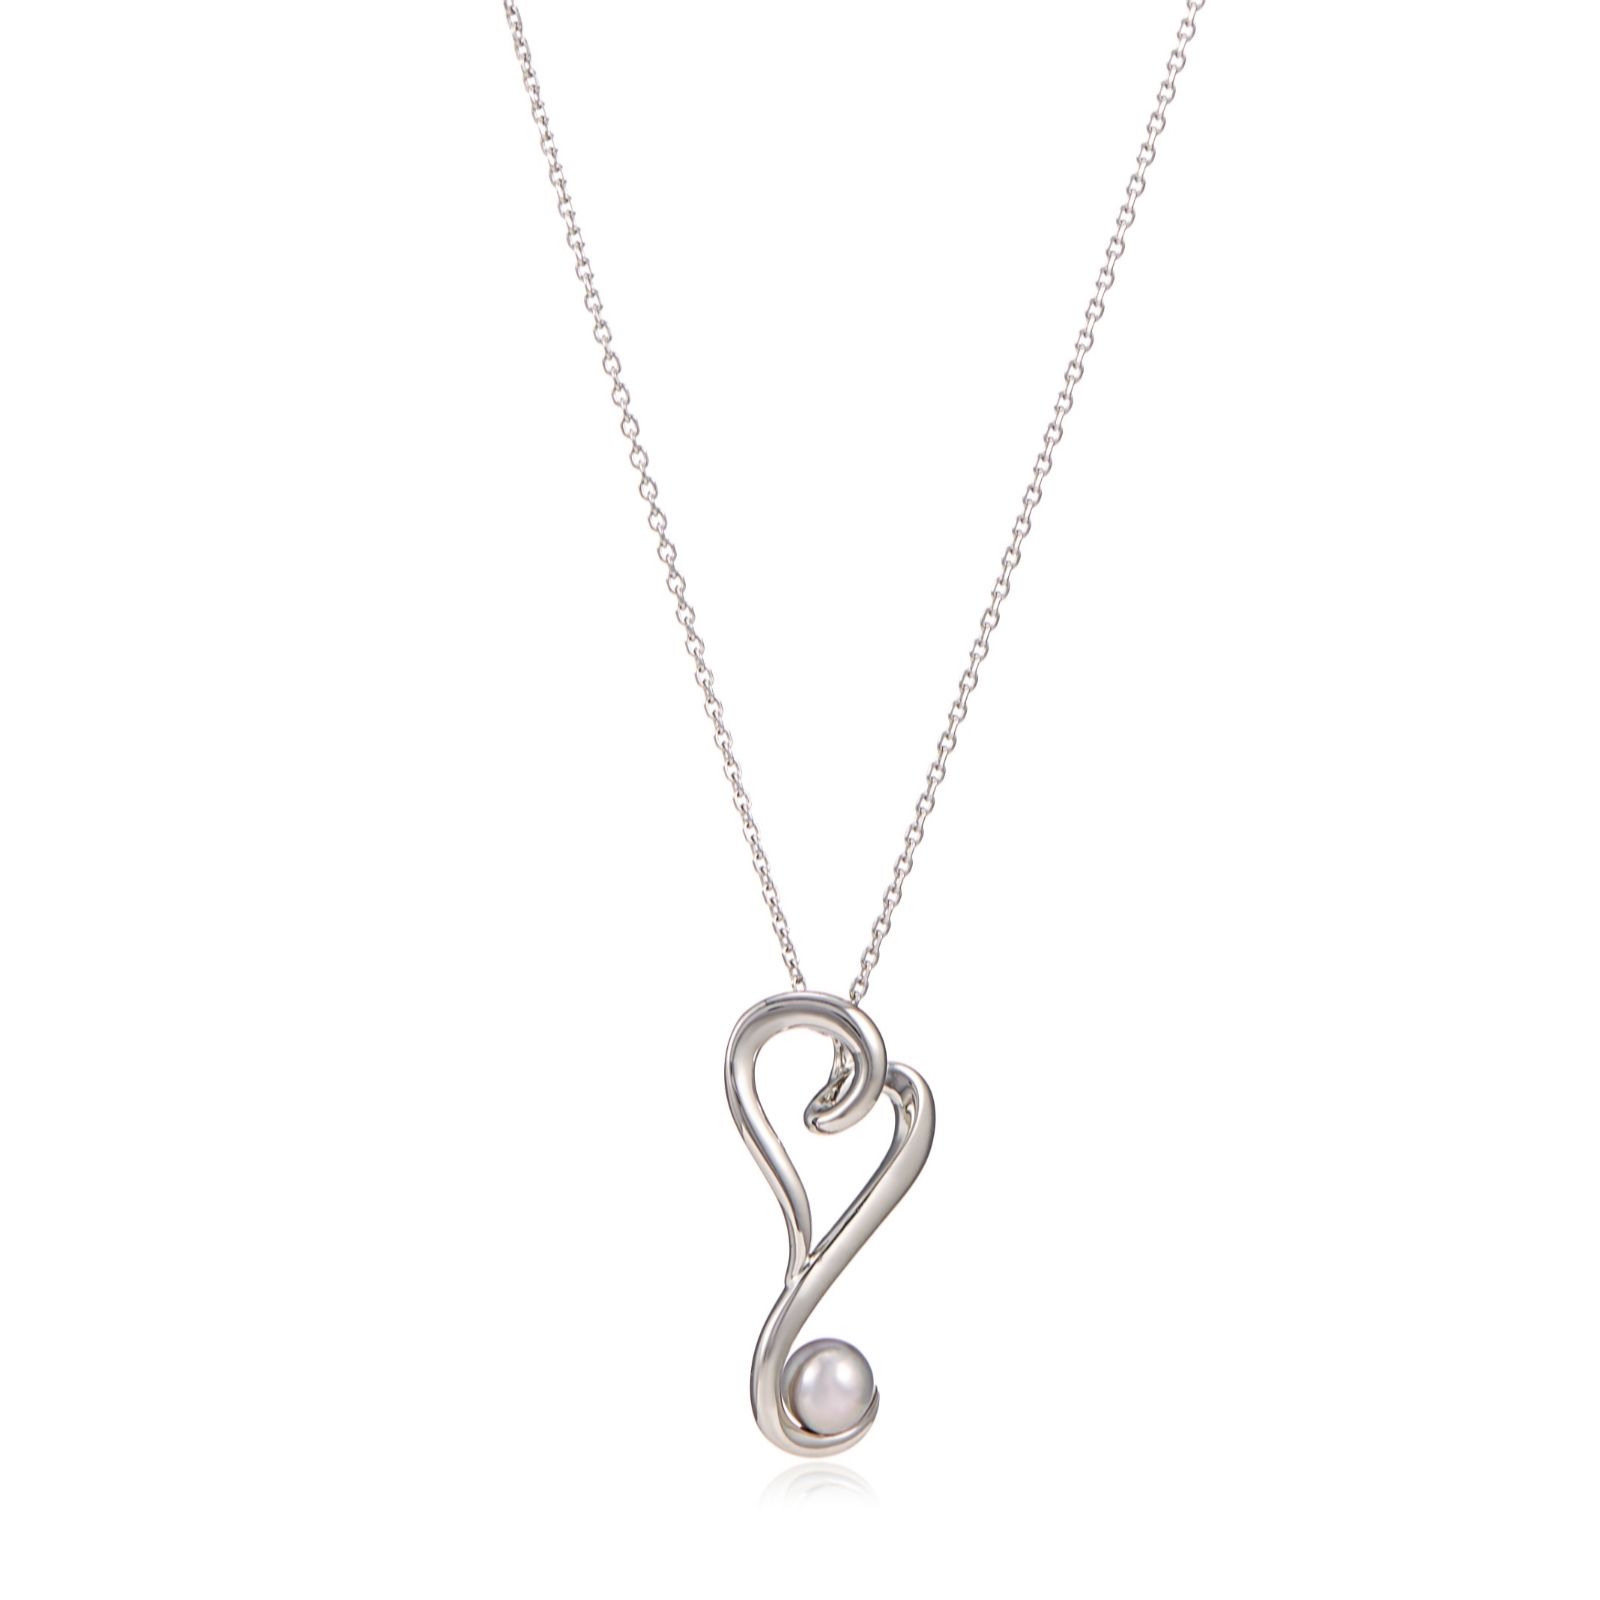 Lara Pearl 6mm Baby Ming Heart Pendant 50cm Necklace Sterling Silver ...